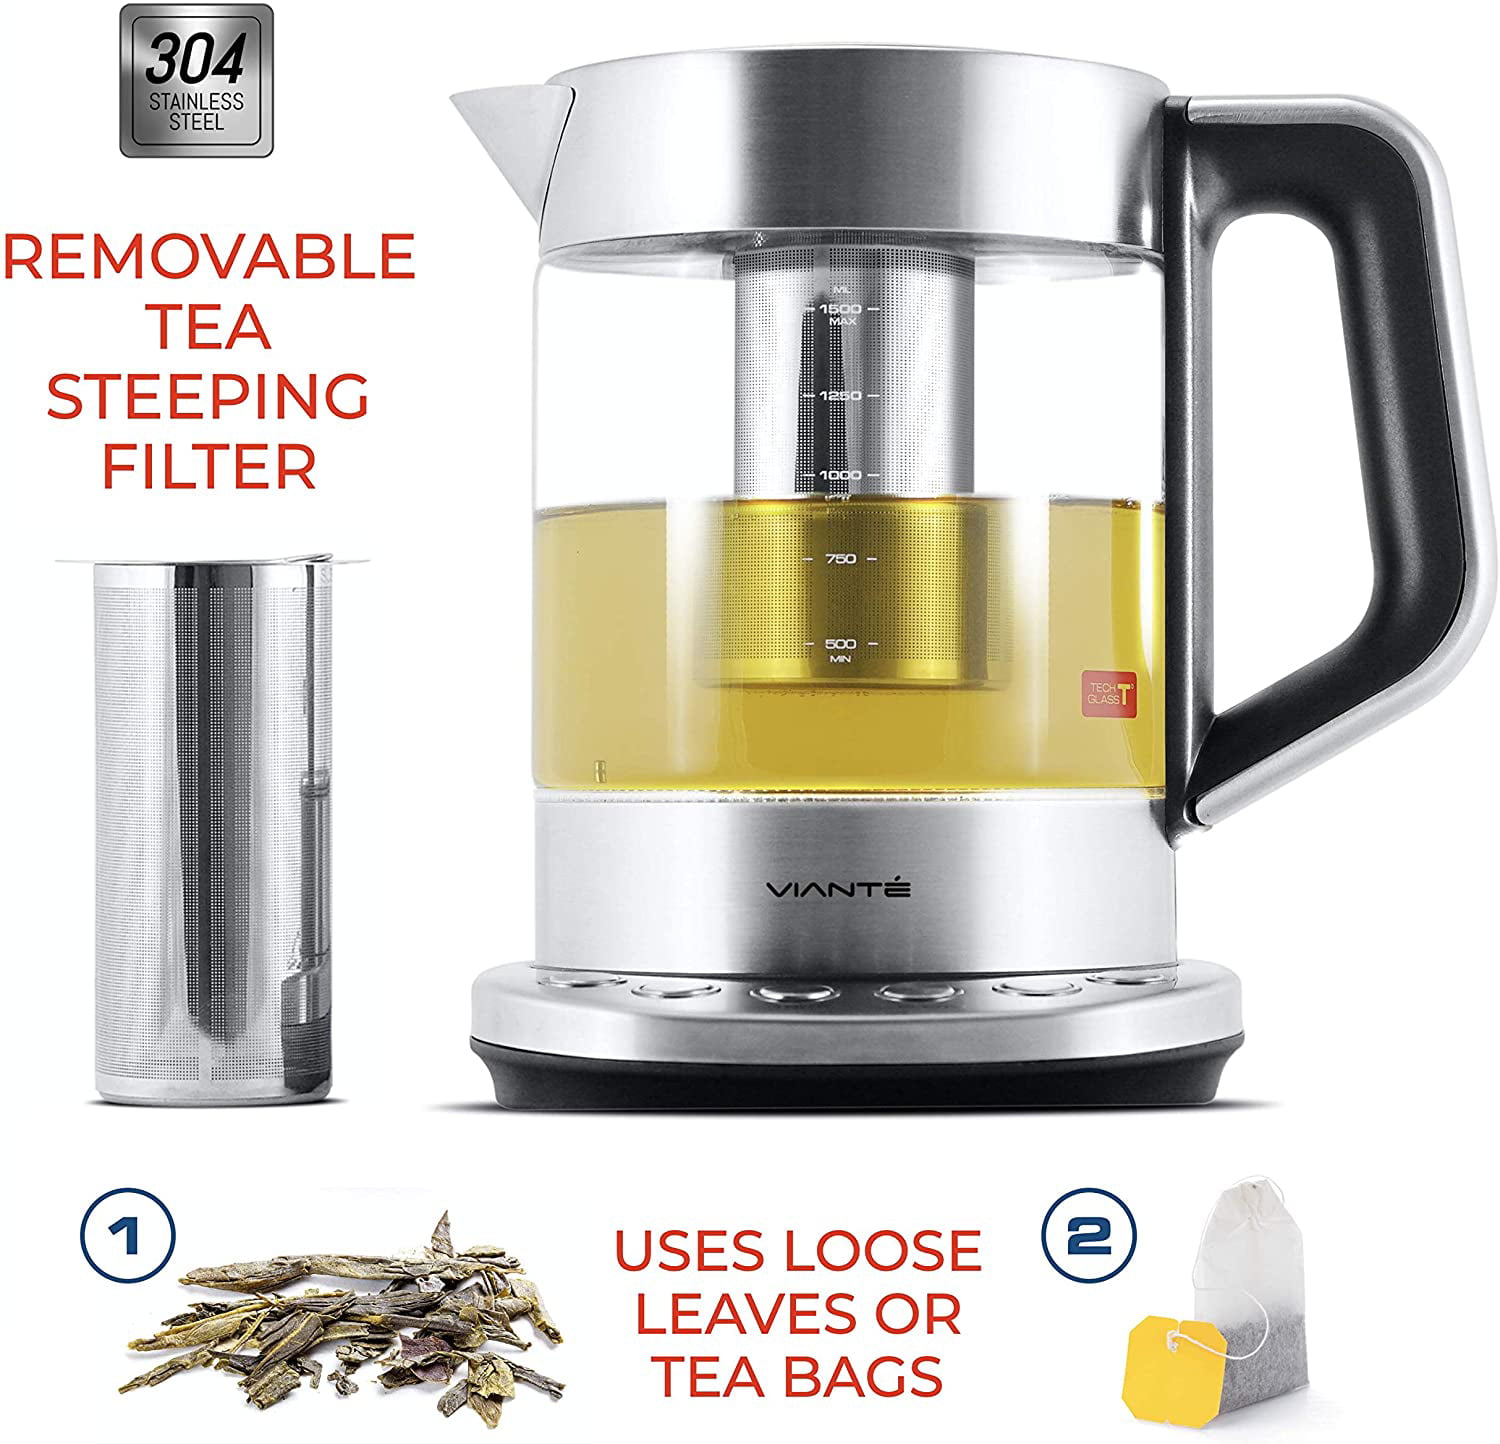 Vianté Electric Glass Tea Kettle with Removable Infuser. Hot Tea Infuser Pot for Loose Leaf & Bagged Tea. BPA-Free. Stainless Steel & Borosilicate